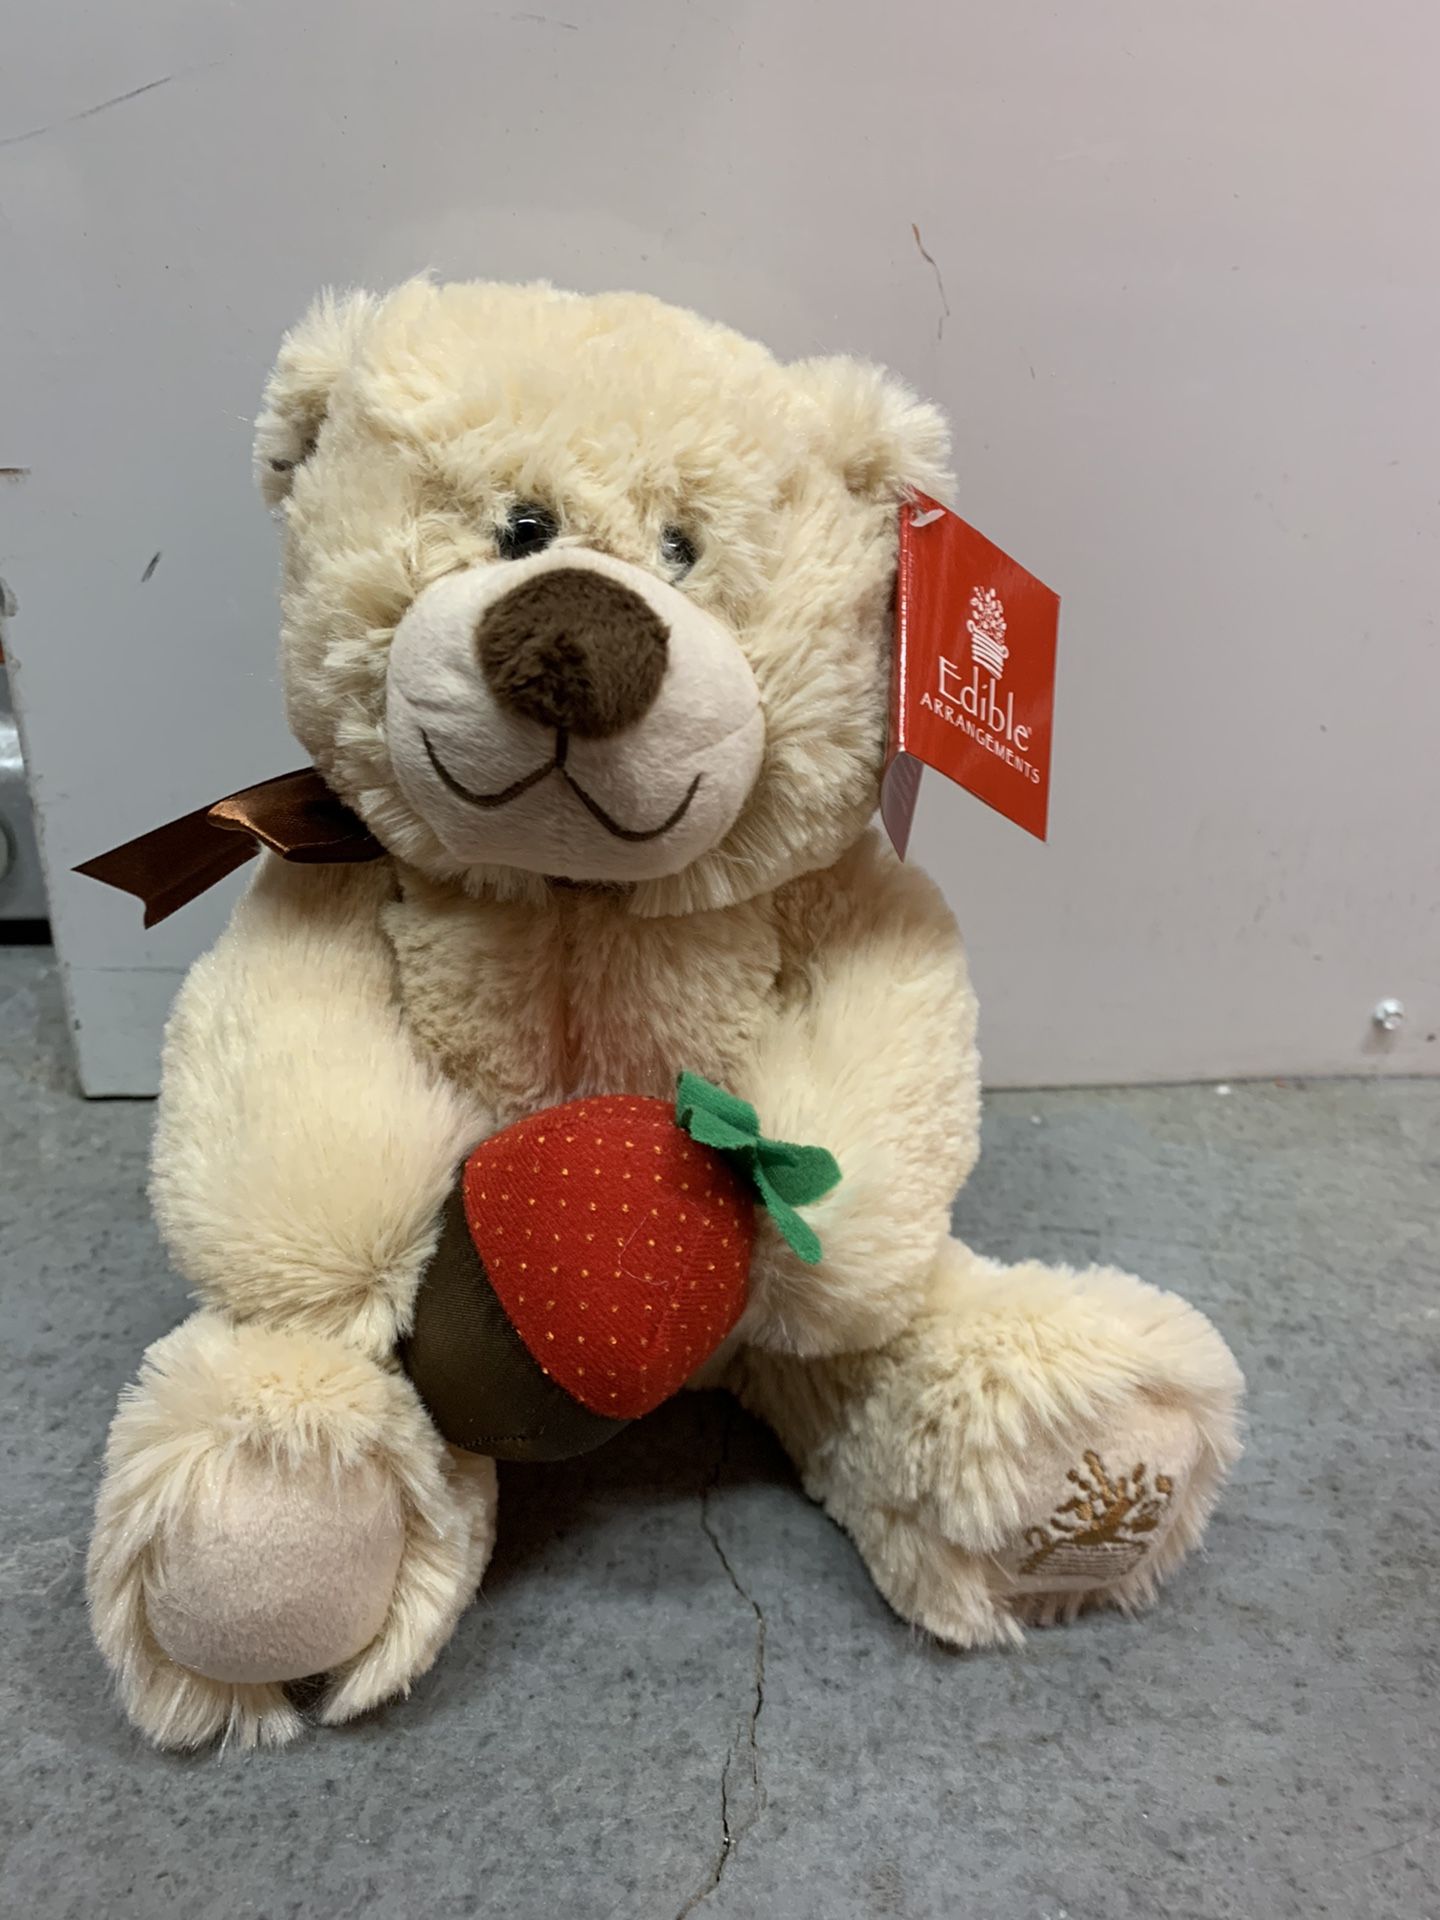 NEW WITH TAGS! - Edible Arrangements Teddy Bear With Chocolate Covered Strawberry 